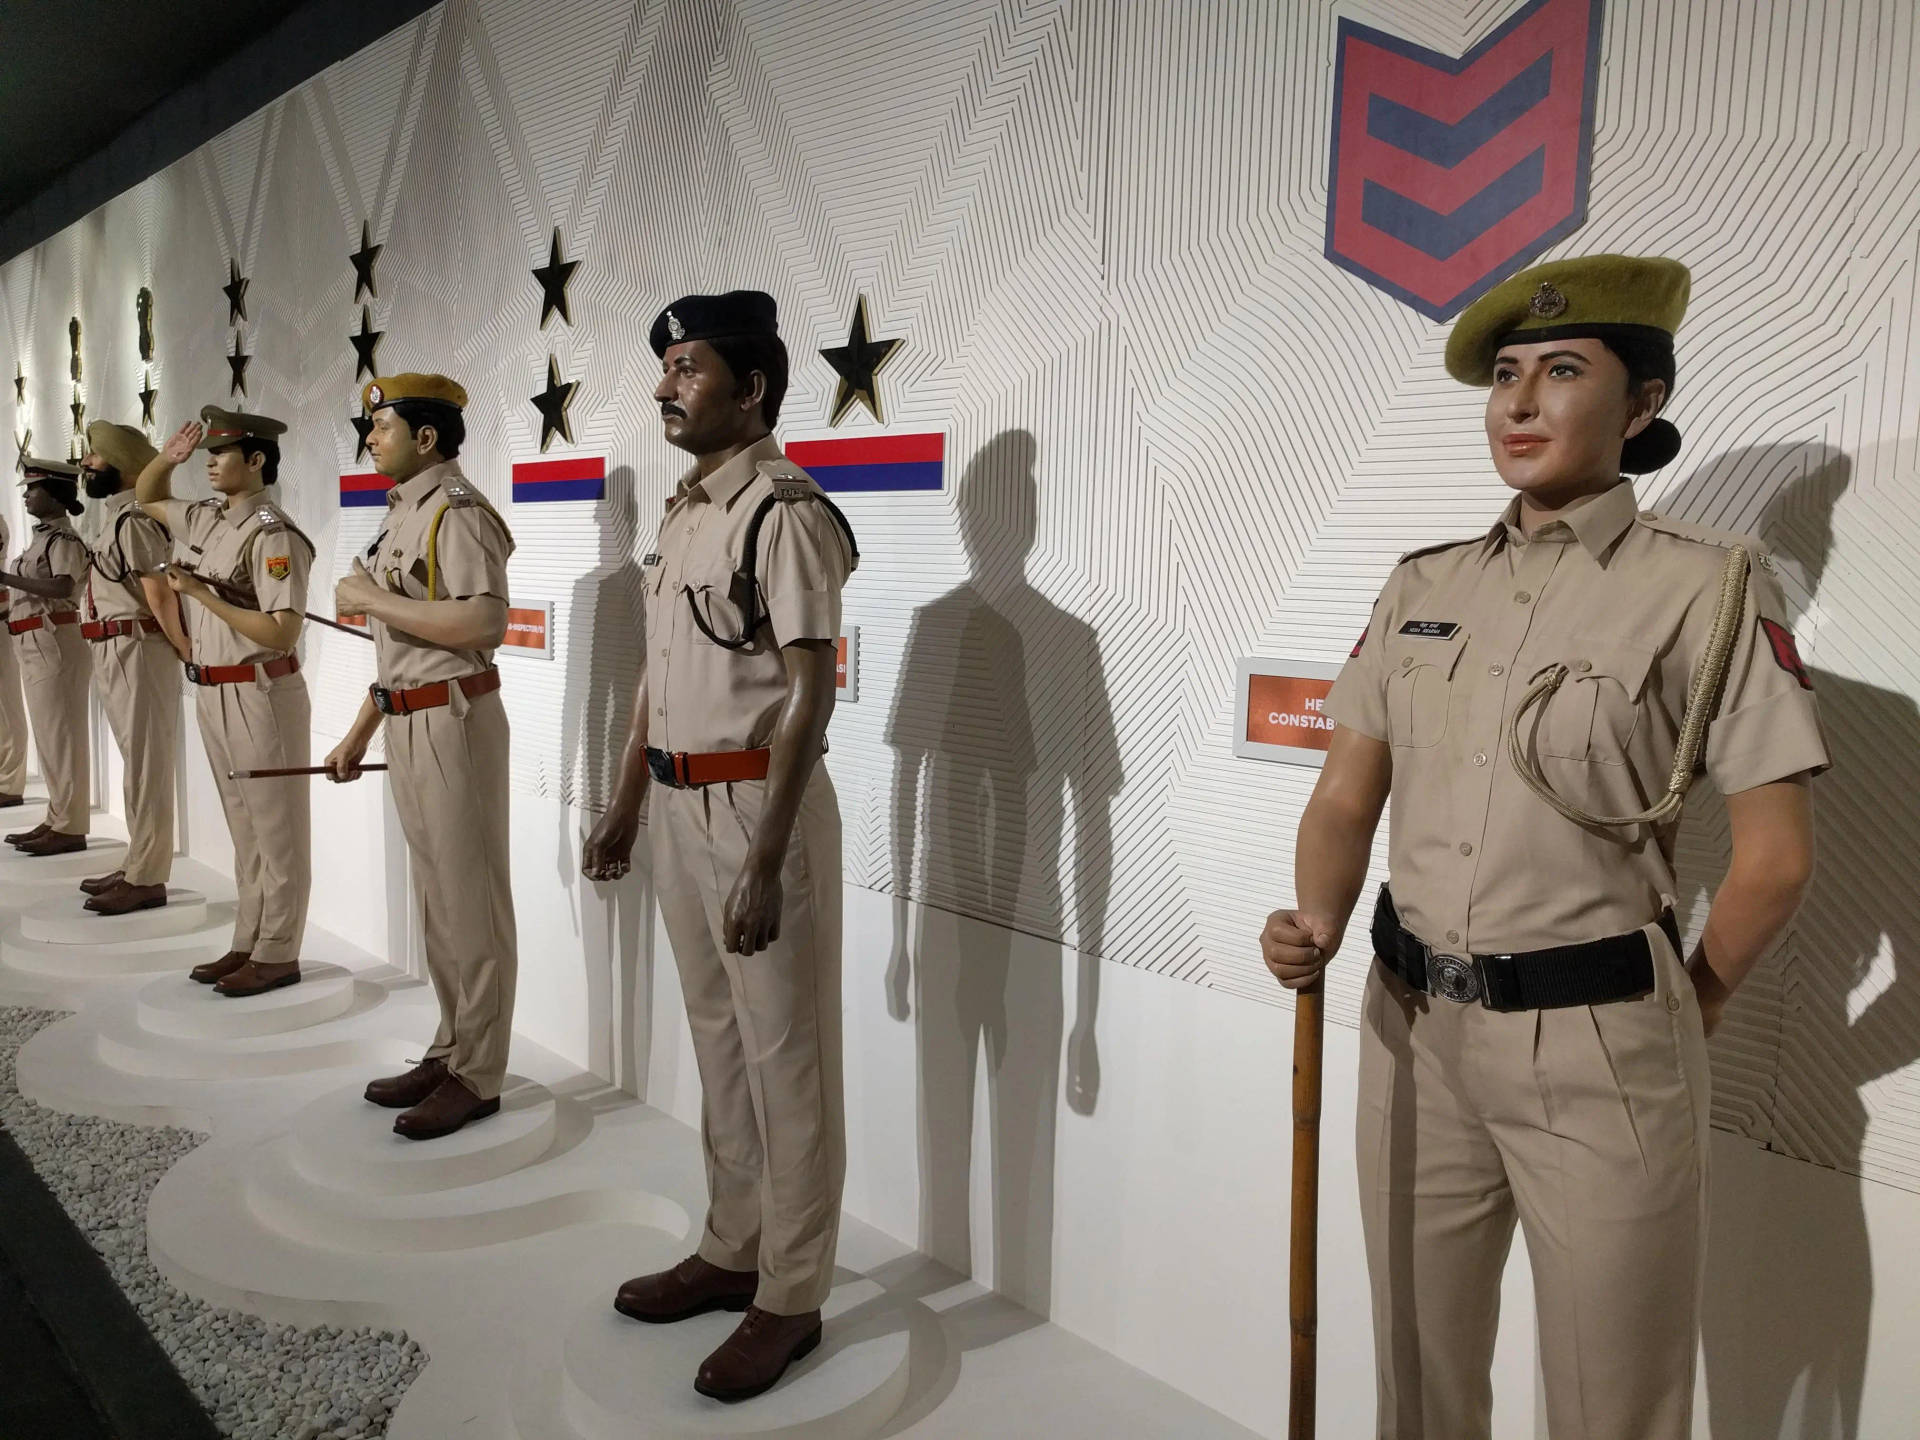 Indian Police Uniforms And Ranks